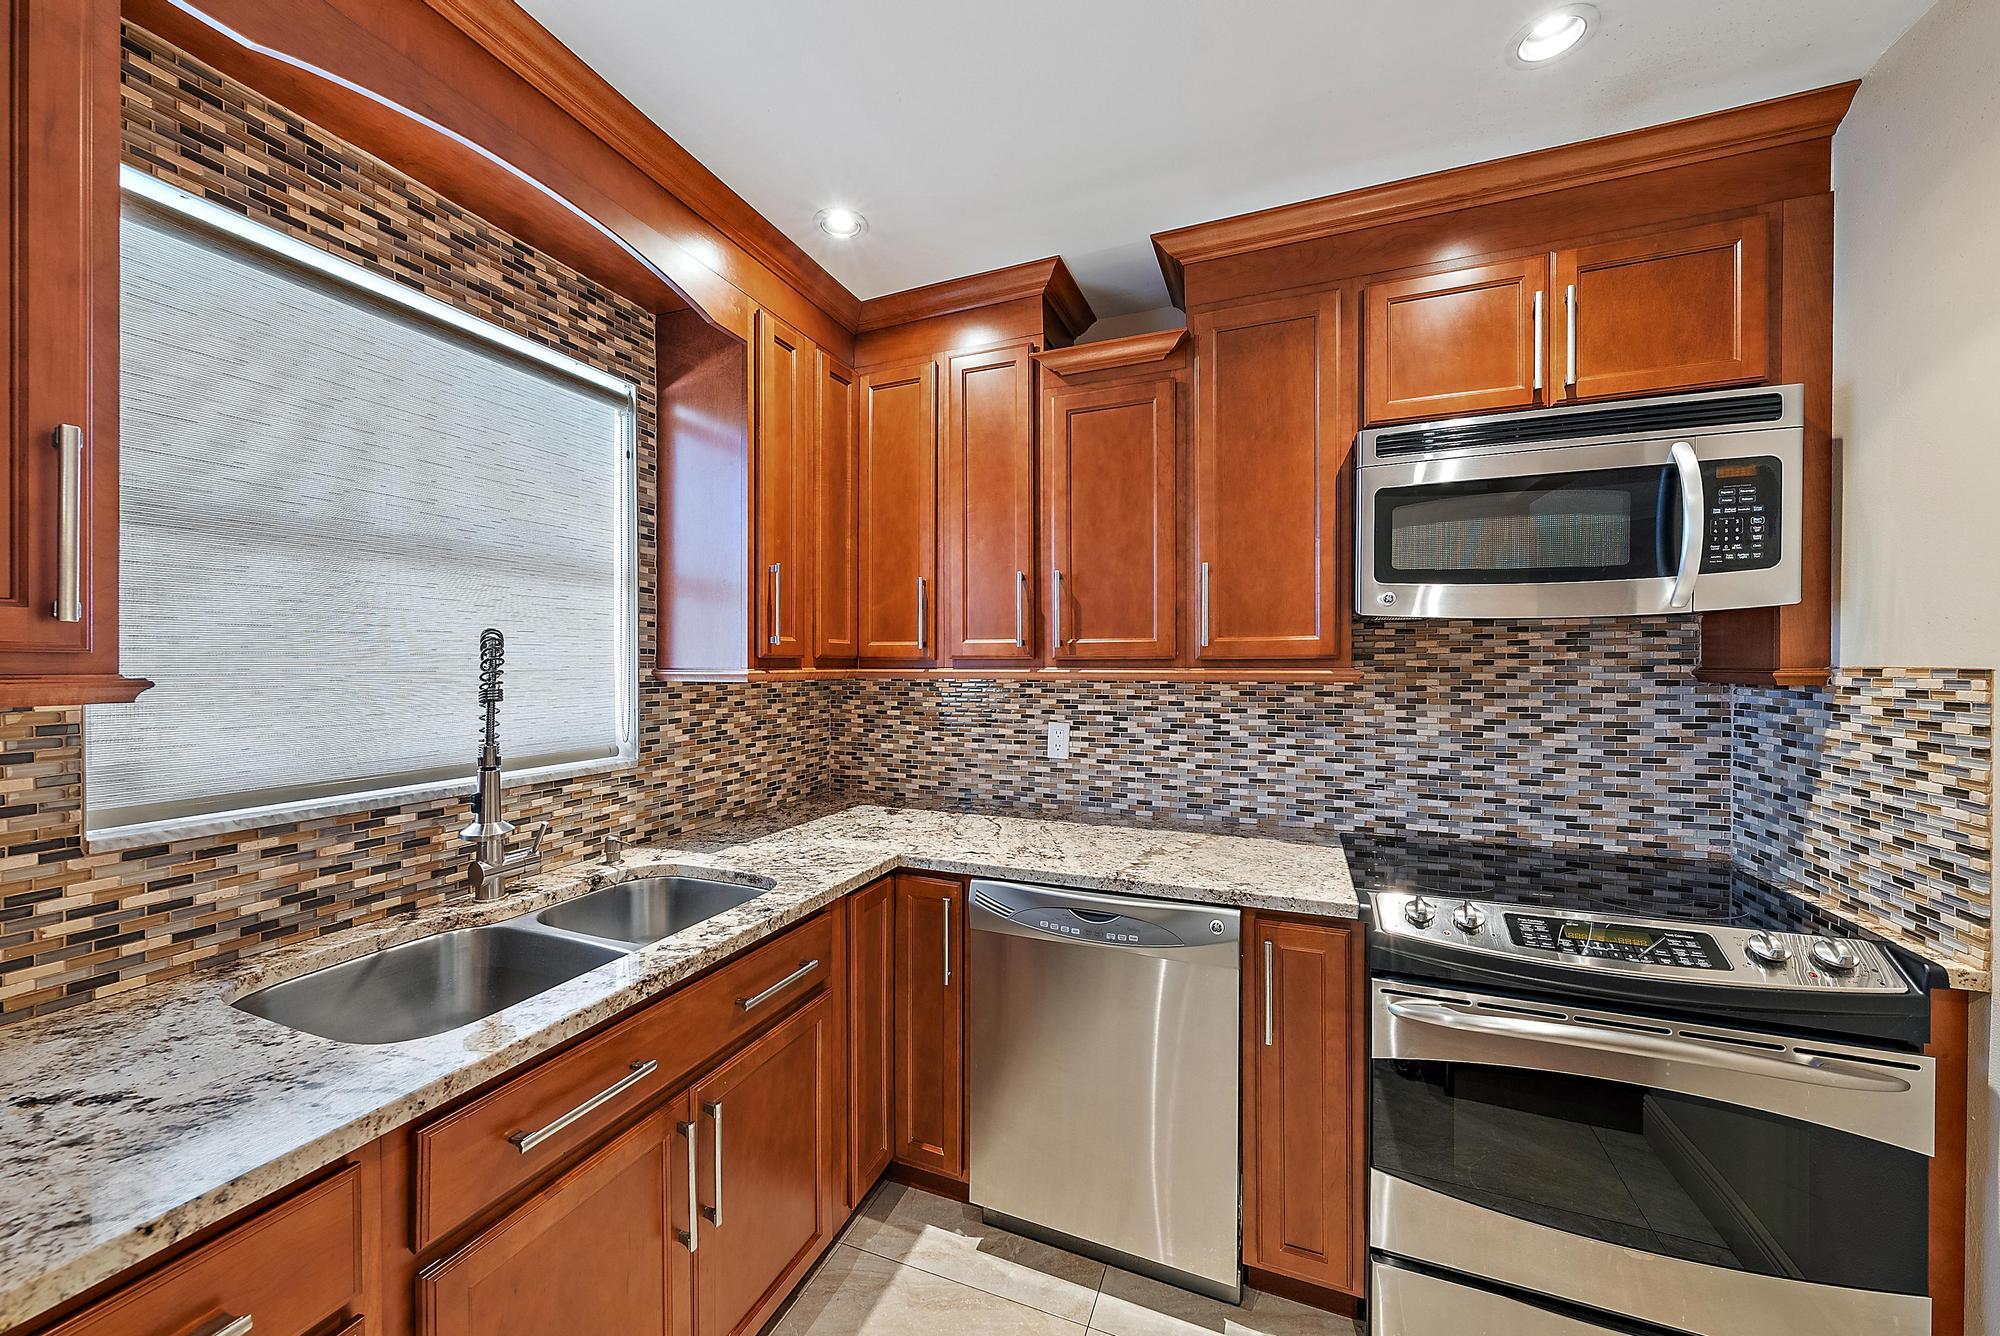 a kitchen with stainless steel appliances a stove sink and microwave